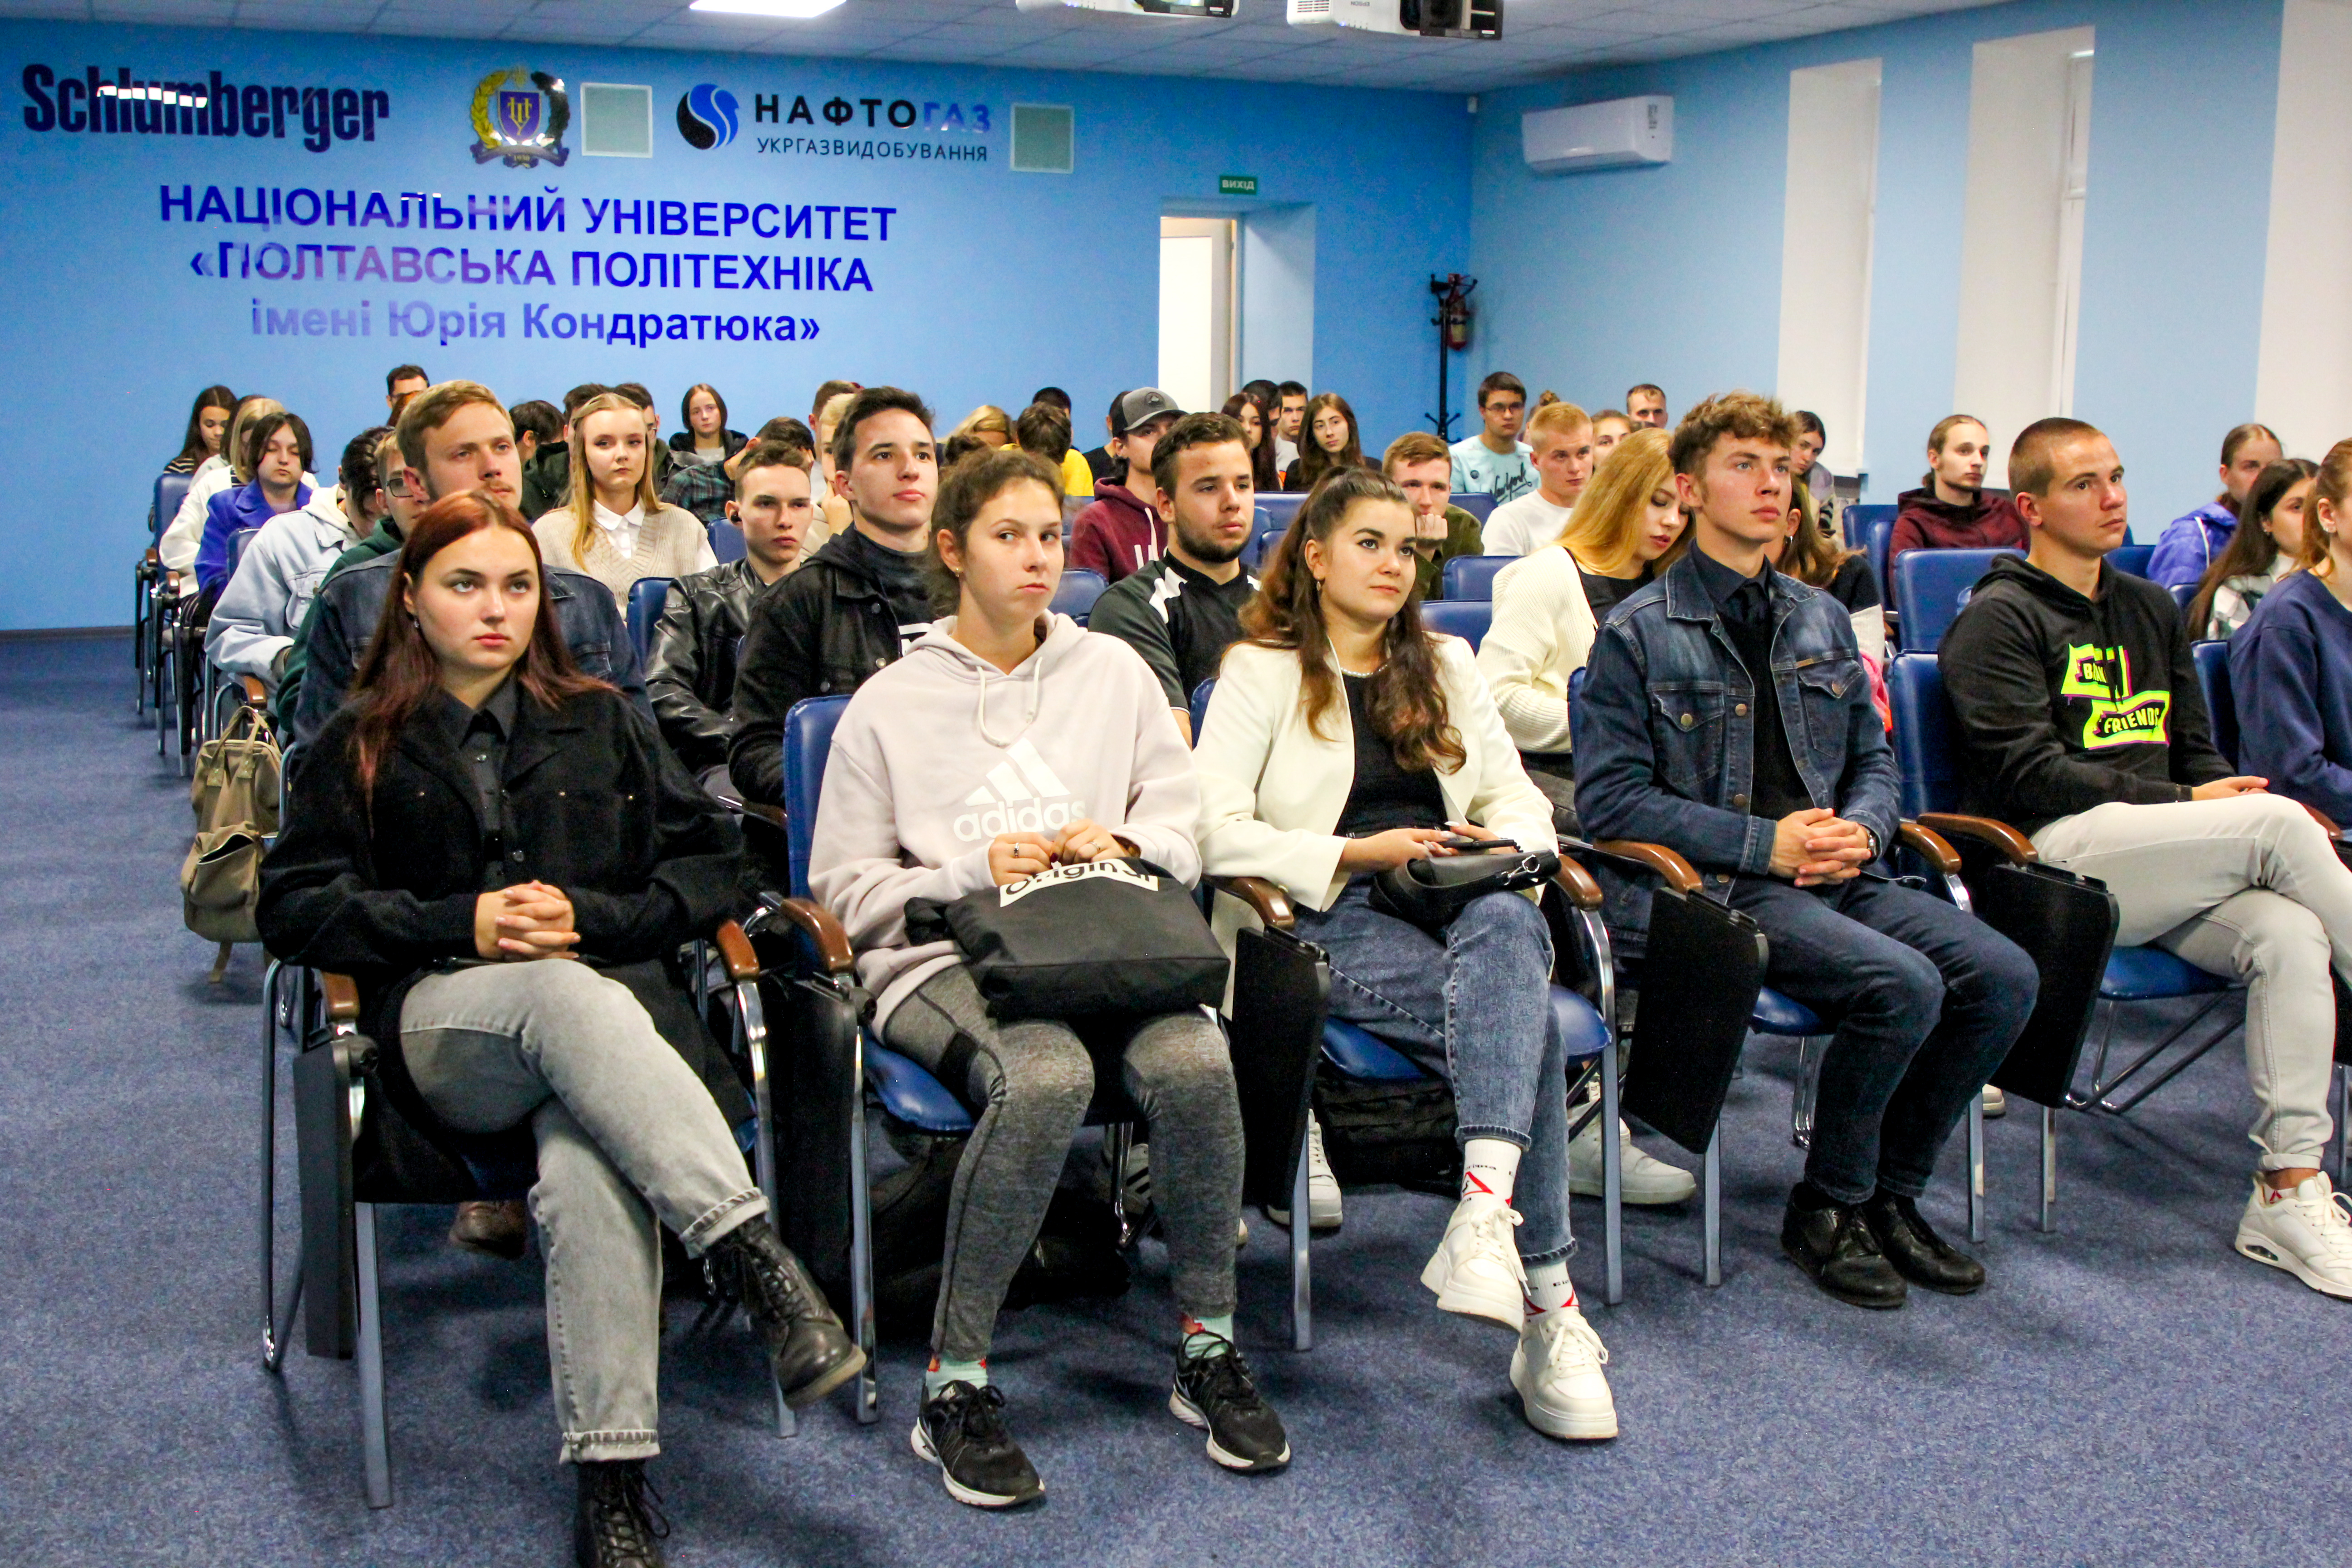 Students attend an all-Ukrainian public lecture by NACP on integrity and combating corrupt...